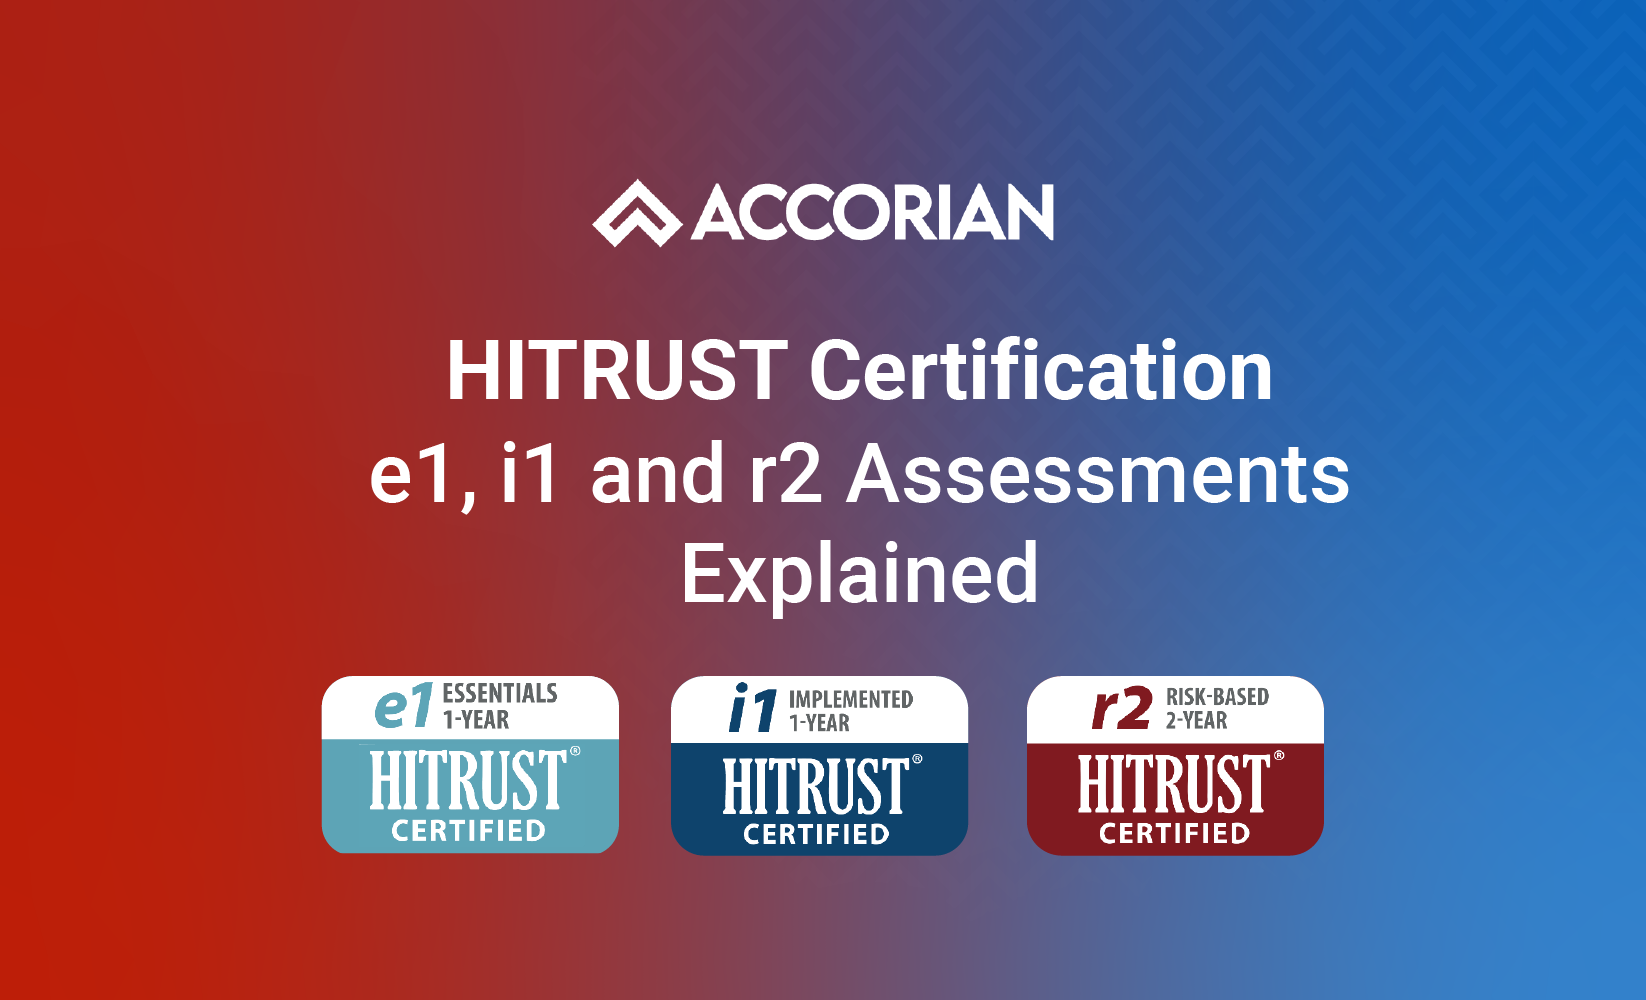 HITRUST Certification – e1, i1, and r2 Assessments Explained